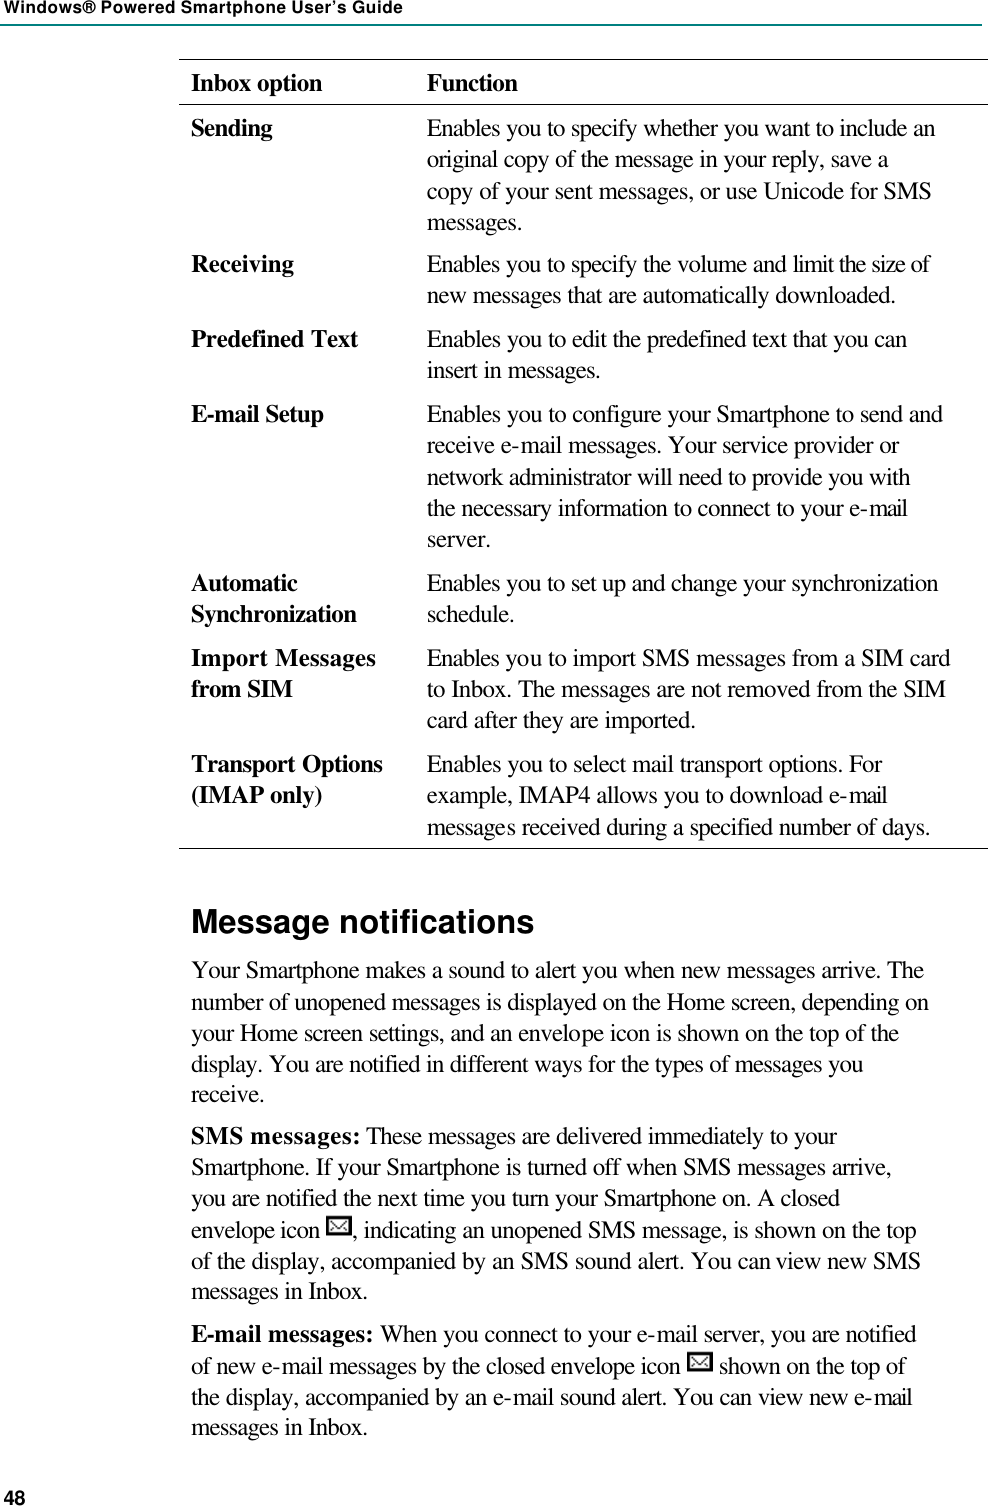 Windows® Powered Smartphone User’s Guide 48 Inbox option Function Sending Enables you to specify whether you want to include an original copy of the message in your reply, save a copy of your sent messages, or use Unicode for SMS messages. Receiving Enables you to specify the volume and limit the size of new messages that are automatically downloaded. Predefined Text Enables you to edit the predefined text that you can insert in messages. E-mail Setup Enables you to configure your Smartphone to send and receive e-mail messages. Your service provider or network administrator will need to provide you with the necessary information to connect to your e-mail server. Automatic Synchronization Enables you to set up and change your synchronization schedule. Import Messages from SIM Enables you to import SMS messages from a SIM card to Inbox. The messages are not removed from the SIM card after they are imported. Transport Options (IMAP only) Enables you to select mail transport options. For example, IMAP4 allows you to download e-mail messages received during a specified number of days. Message notifications Your Smartphone makes a sound to alert you when new messages arrive. The number of unopened messages is displayed on the Home screen, depending on your Home screen settings, and an envelope icon is shown on the top of the display. You are notified in different ways for the types of messages you receive. SMS messages: These messages are delivered immediately to your Smartphone. If your Smartphone is turned off when SMS messages arrive, you are notified the next time you turn your Smartphone on. A closed envelope icon  , indicating an unopened SMS message, is shown on the top of the display, accompanied by an SMS sound alert. You can view new SMS messages in Inbox. E-mail messages: When you connect to your e-mail server, you are notified of new e-mail messages by the closed envelope icon   shown on the top of the display, accompanied by an e-mail sound alert. You can view new e-mail messages in Inbox. 